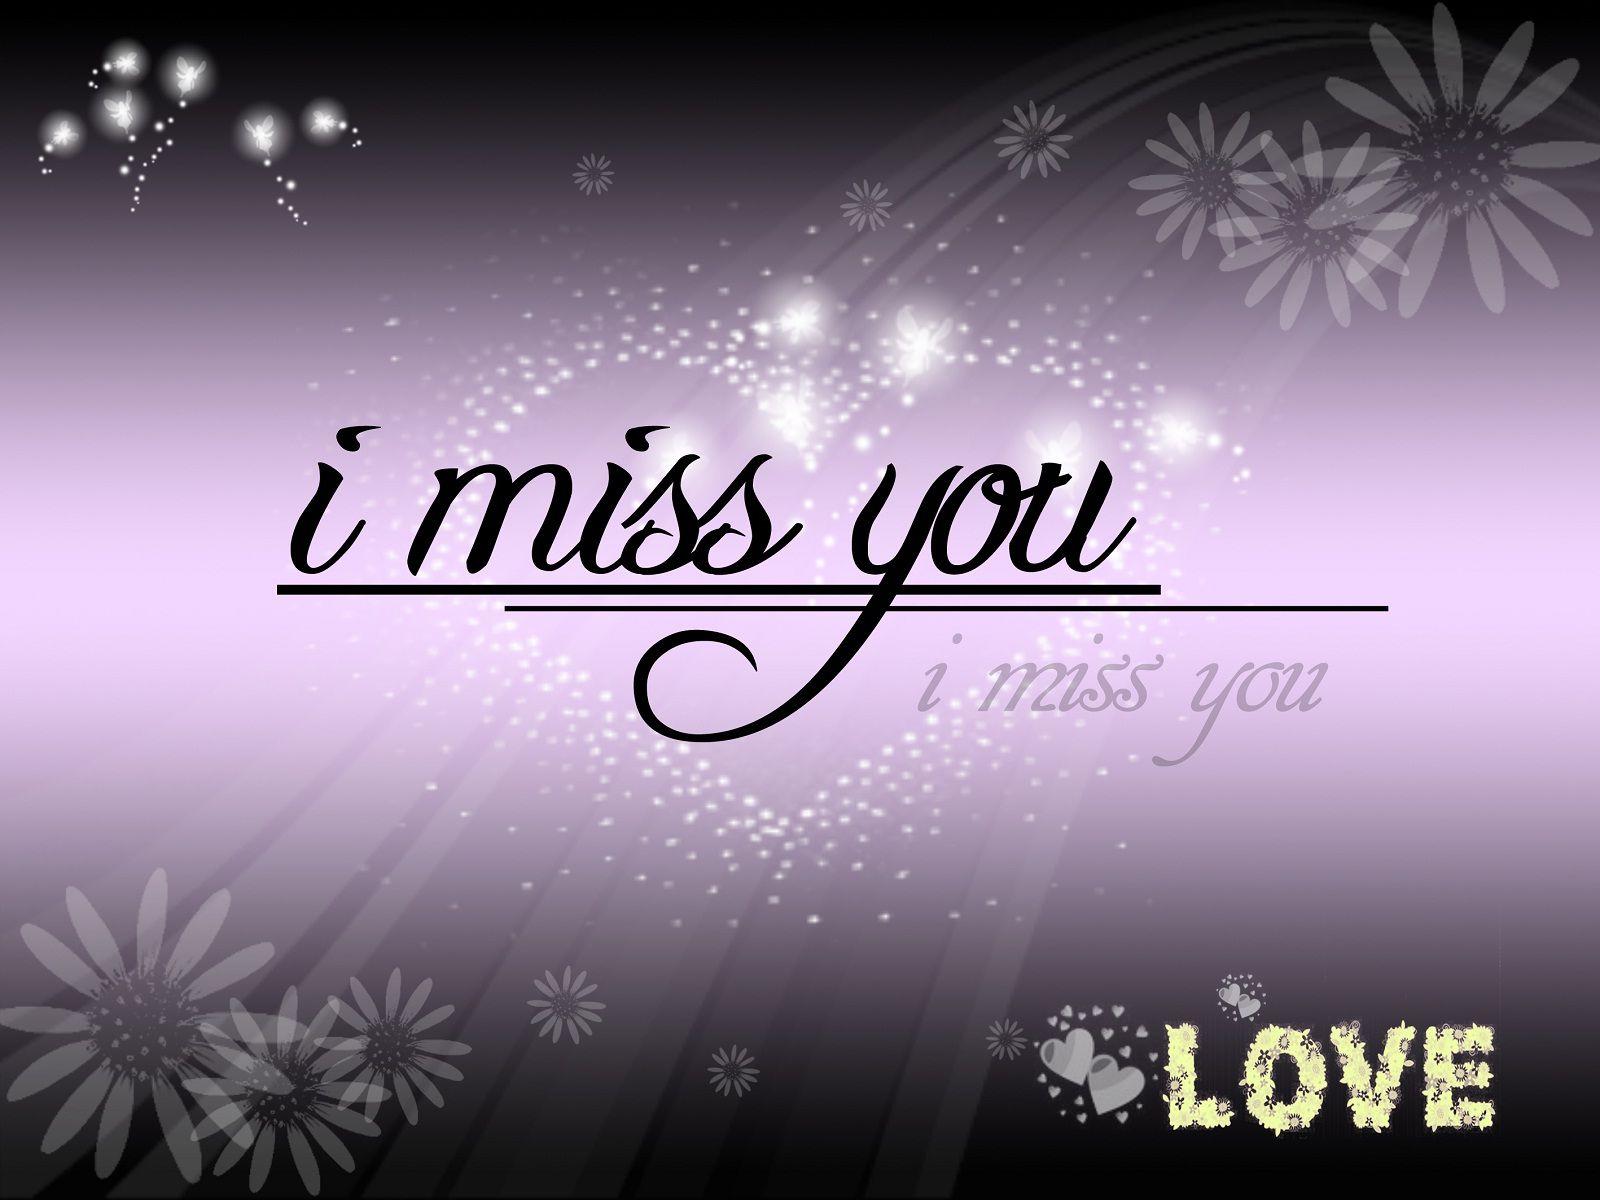 I miss you photo quotes and wallpaper missing you my love 1600x1200